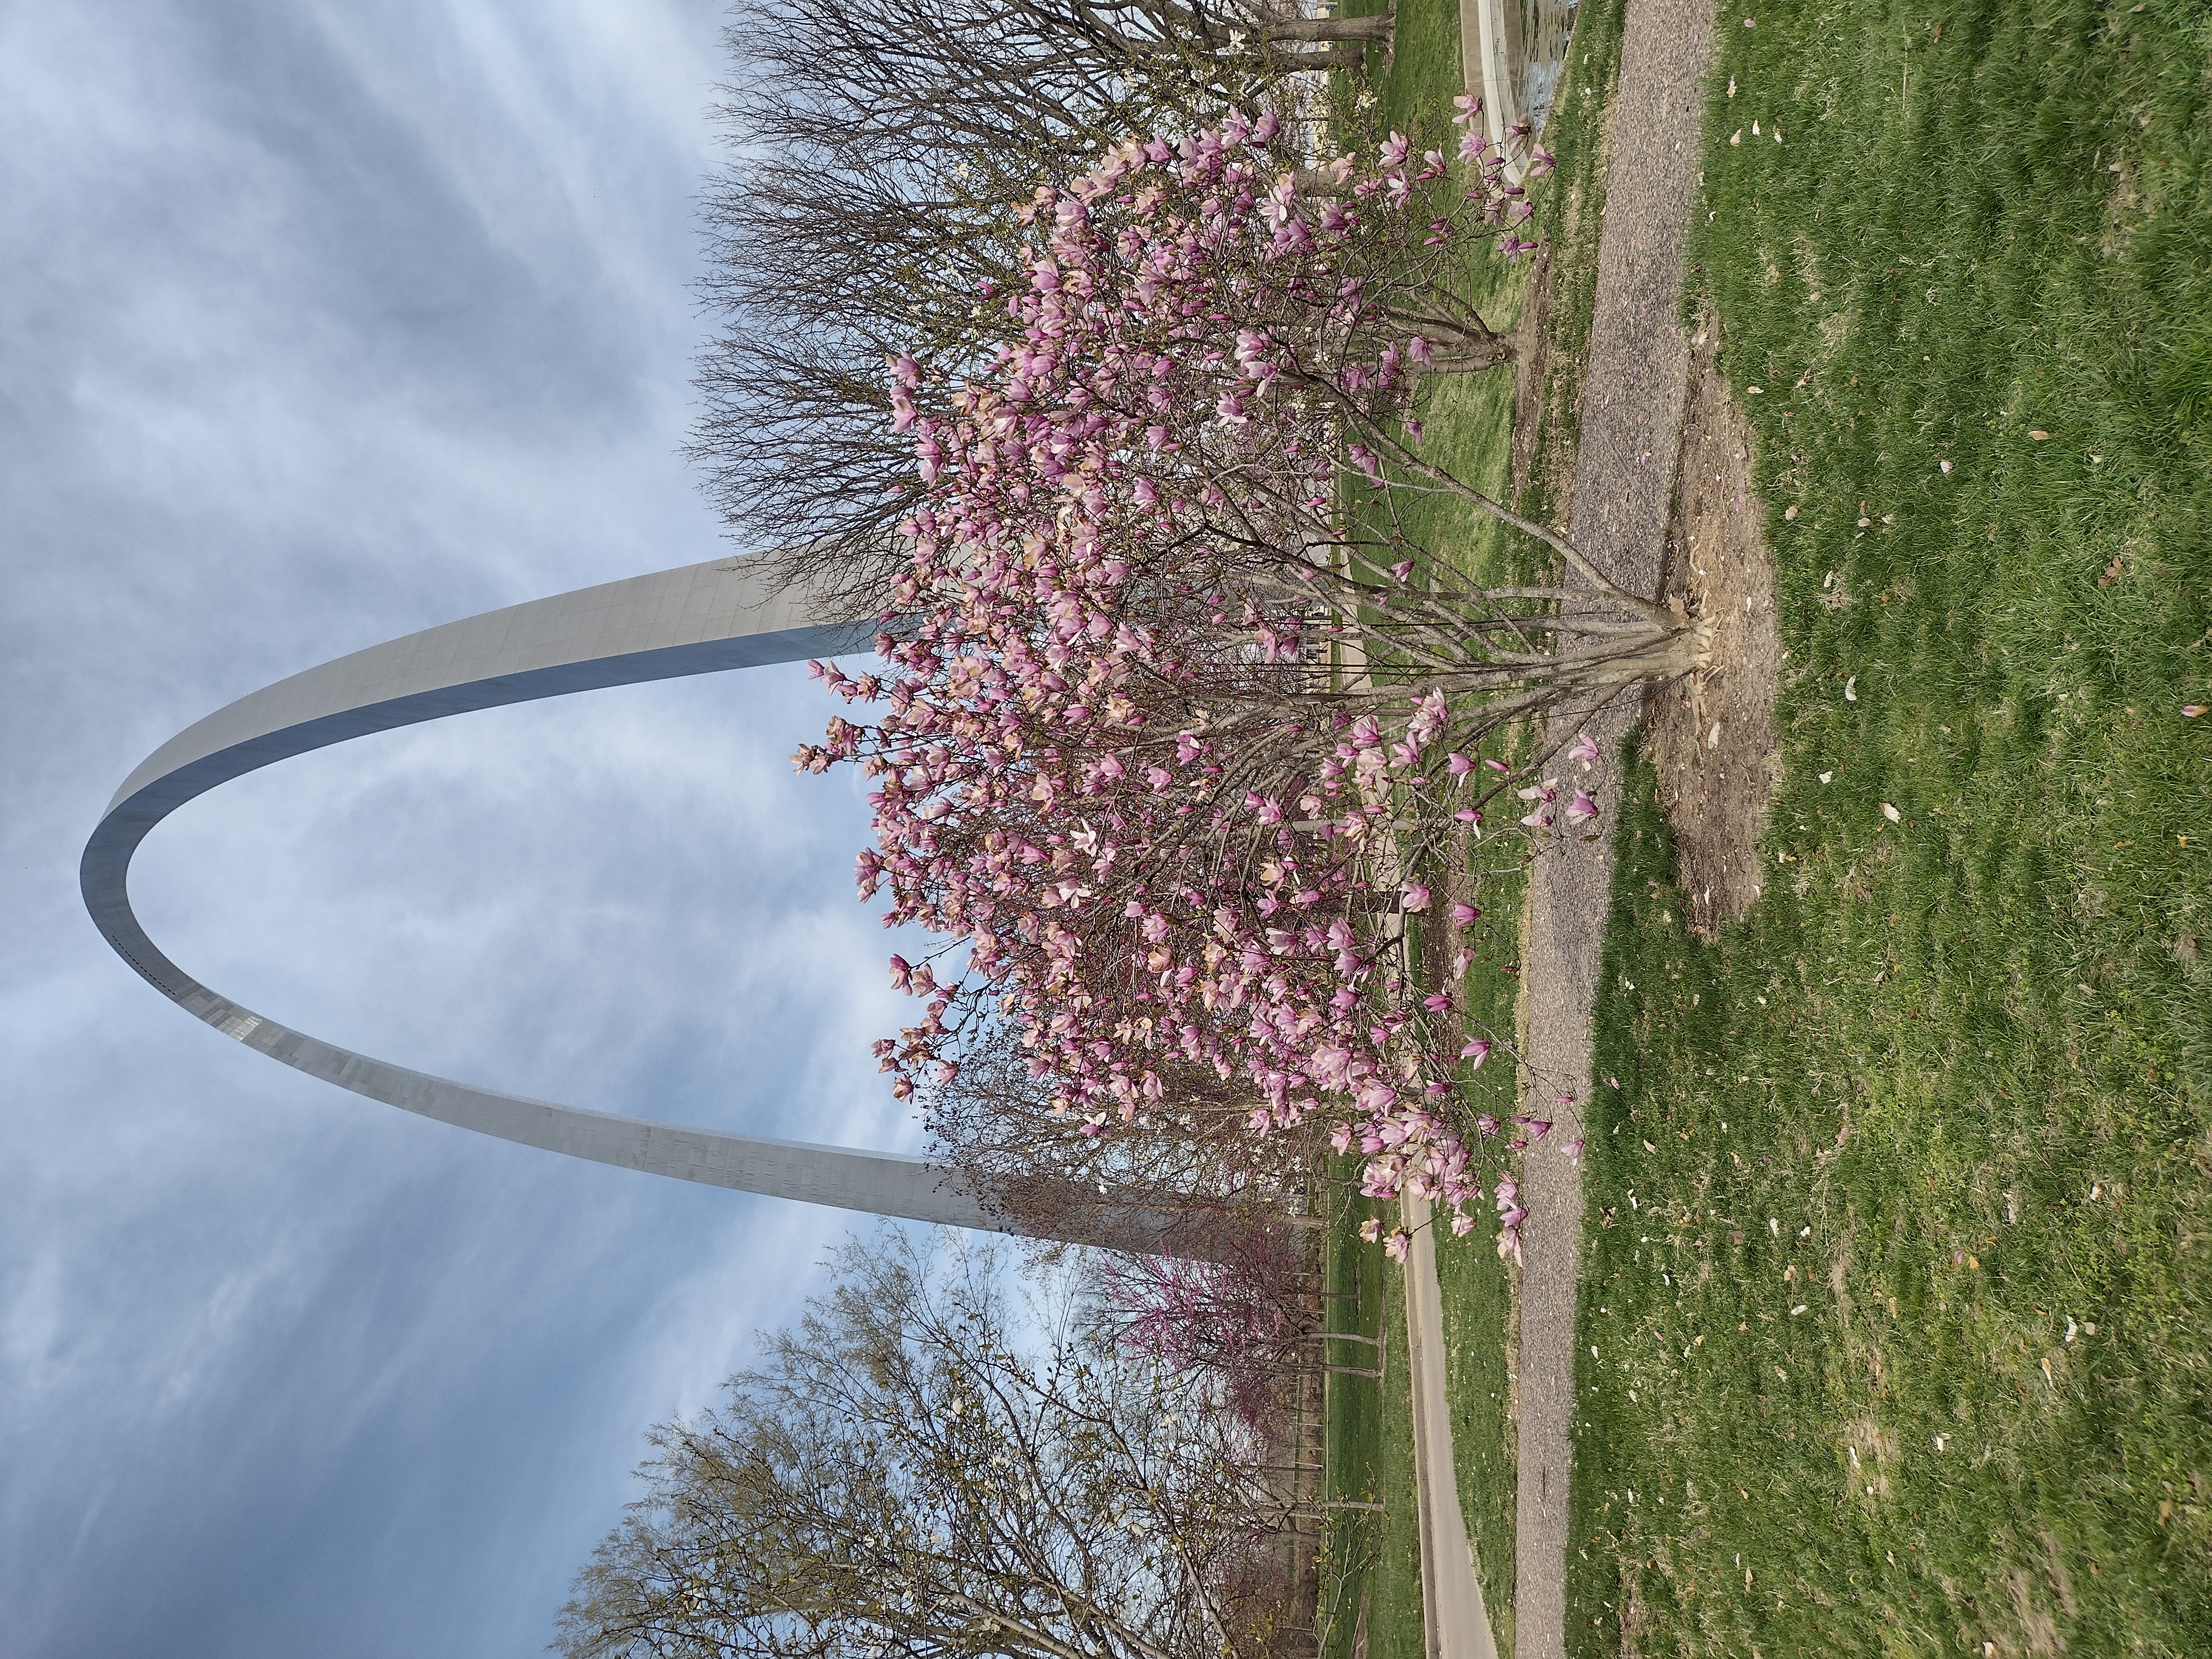 A small tree covered in pink and white blooms, with the Gateway Arch in the background